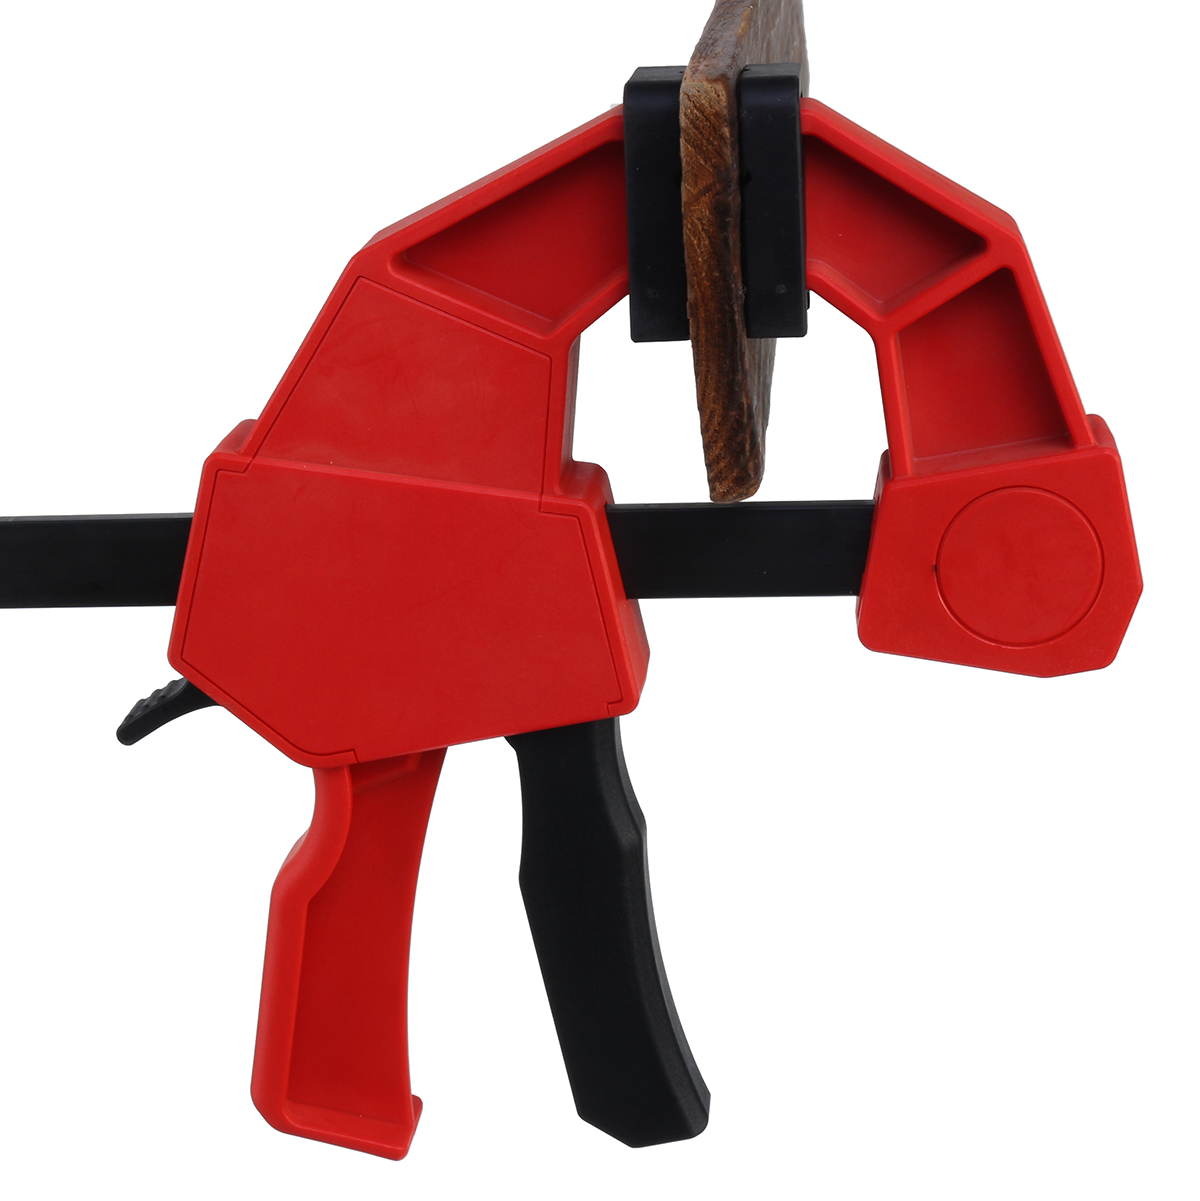 3036Inch-Heavy-Duty-F-Clamp-WoodWorking-Quick-Grip-Bar-Plastic-Grip-Wood-Clamp-1630185-8